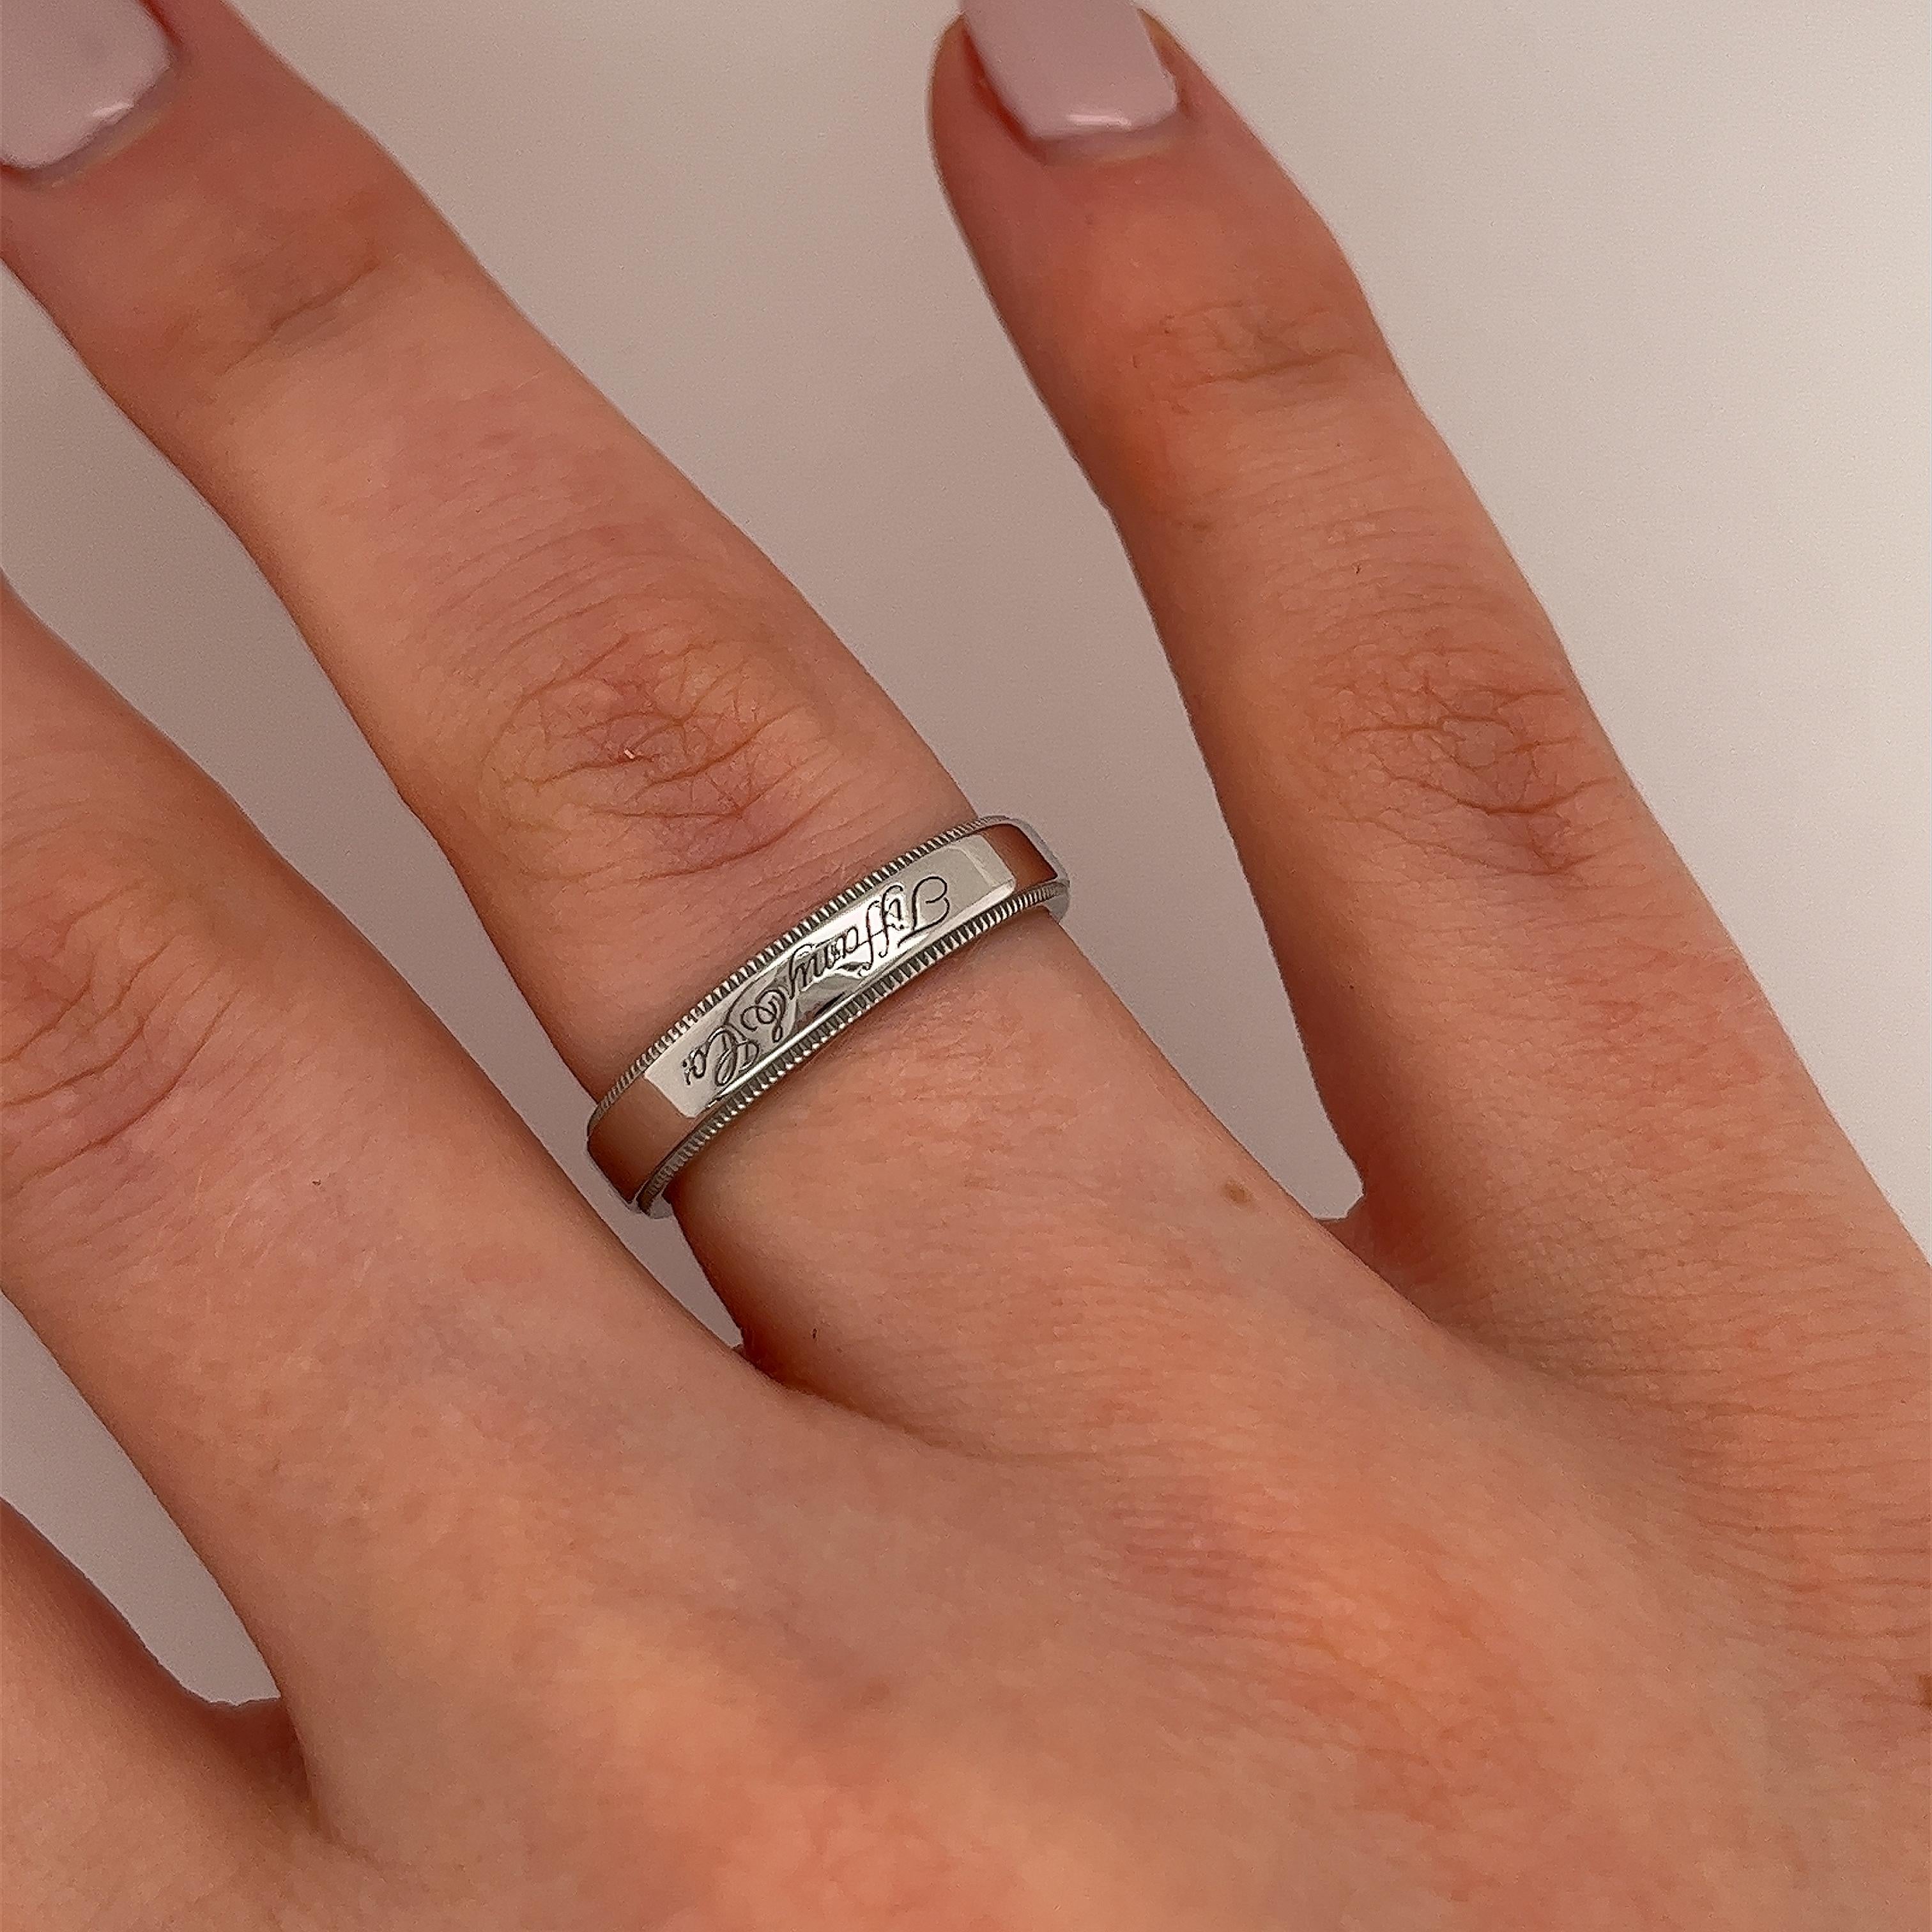 Tiffany & Co. 4mm Together Platinum Milgrain Edge Wedding Ring is a meaningful and enduring symbol of the bond shared between two individuals. Its classic design, superior craftsmanship, and timeless elegance make it a treasured heirloom for